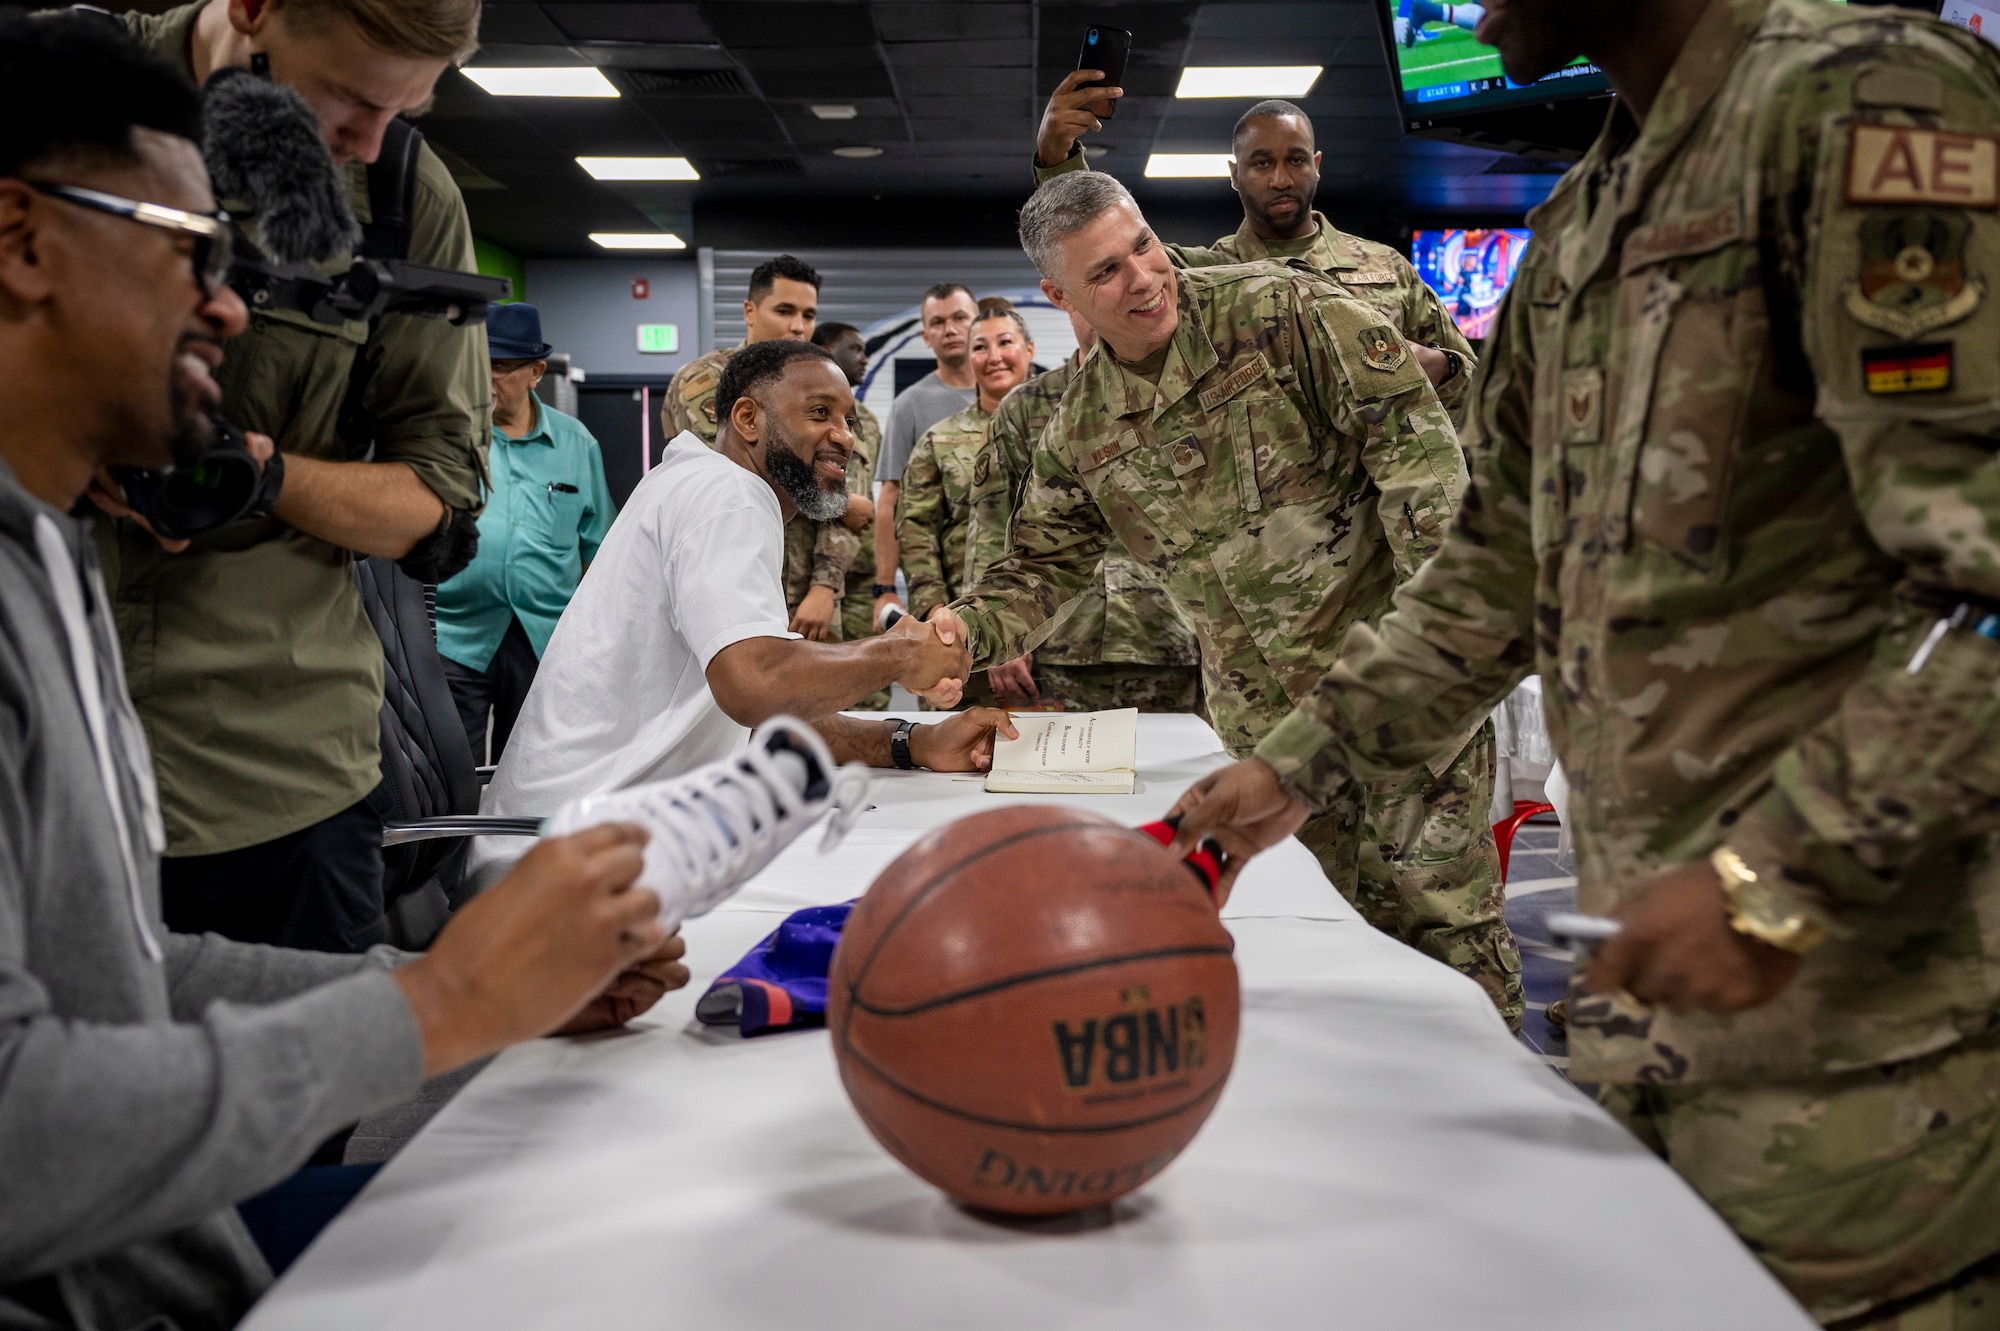 An Airman poses for a photo with Tracy McGrady at a luncheon Nov. 11, 2021 at Al Udeid Air Base, Qatar.